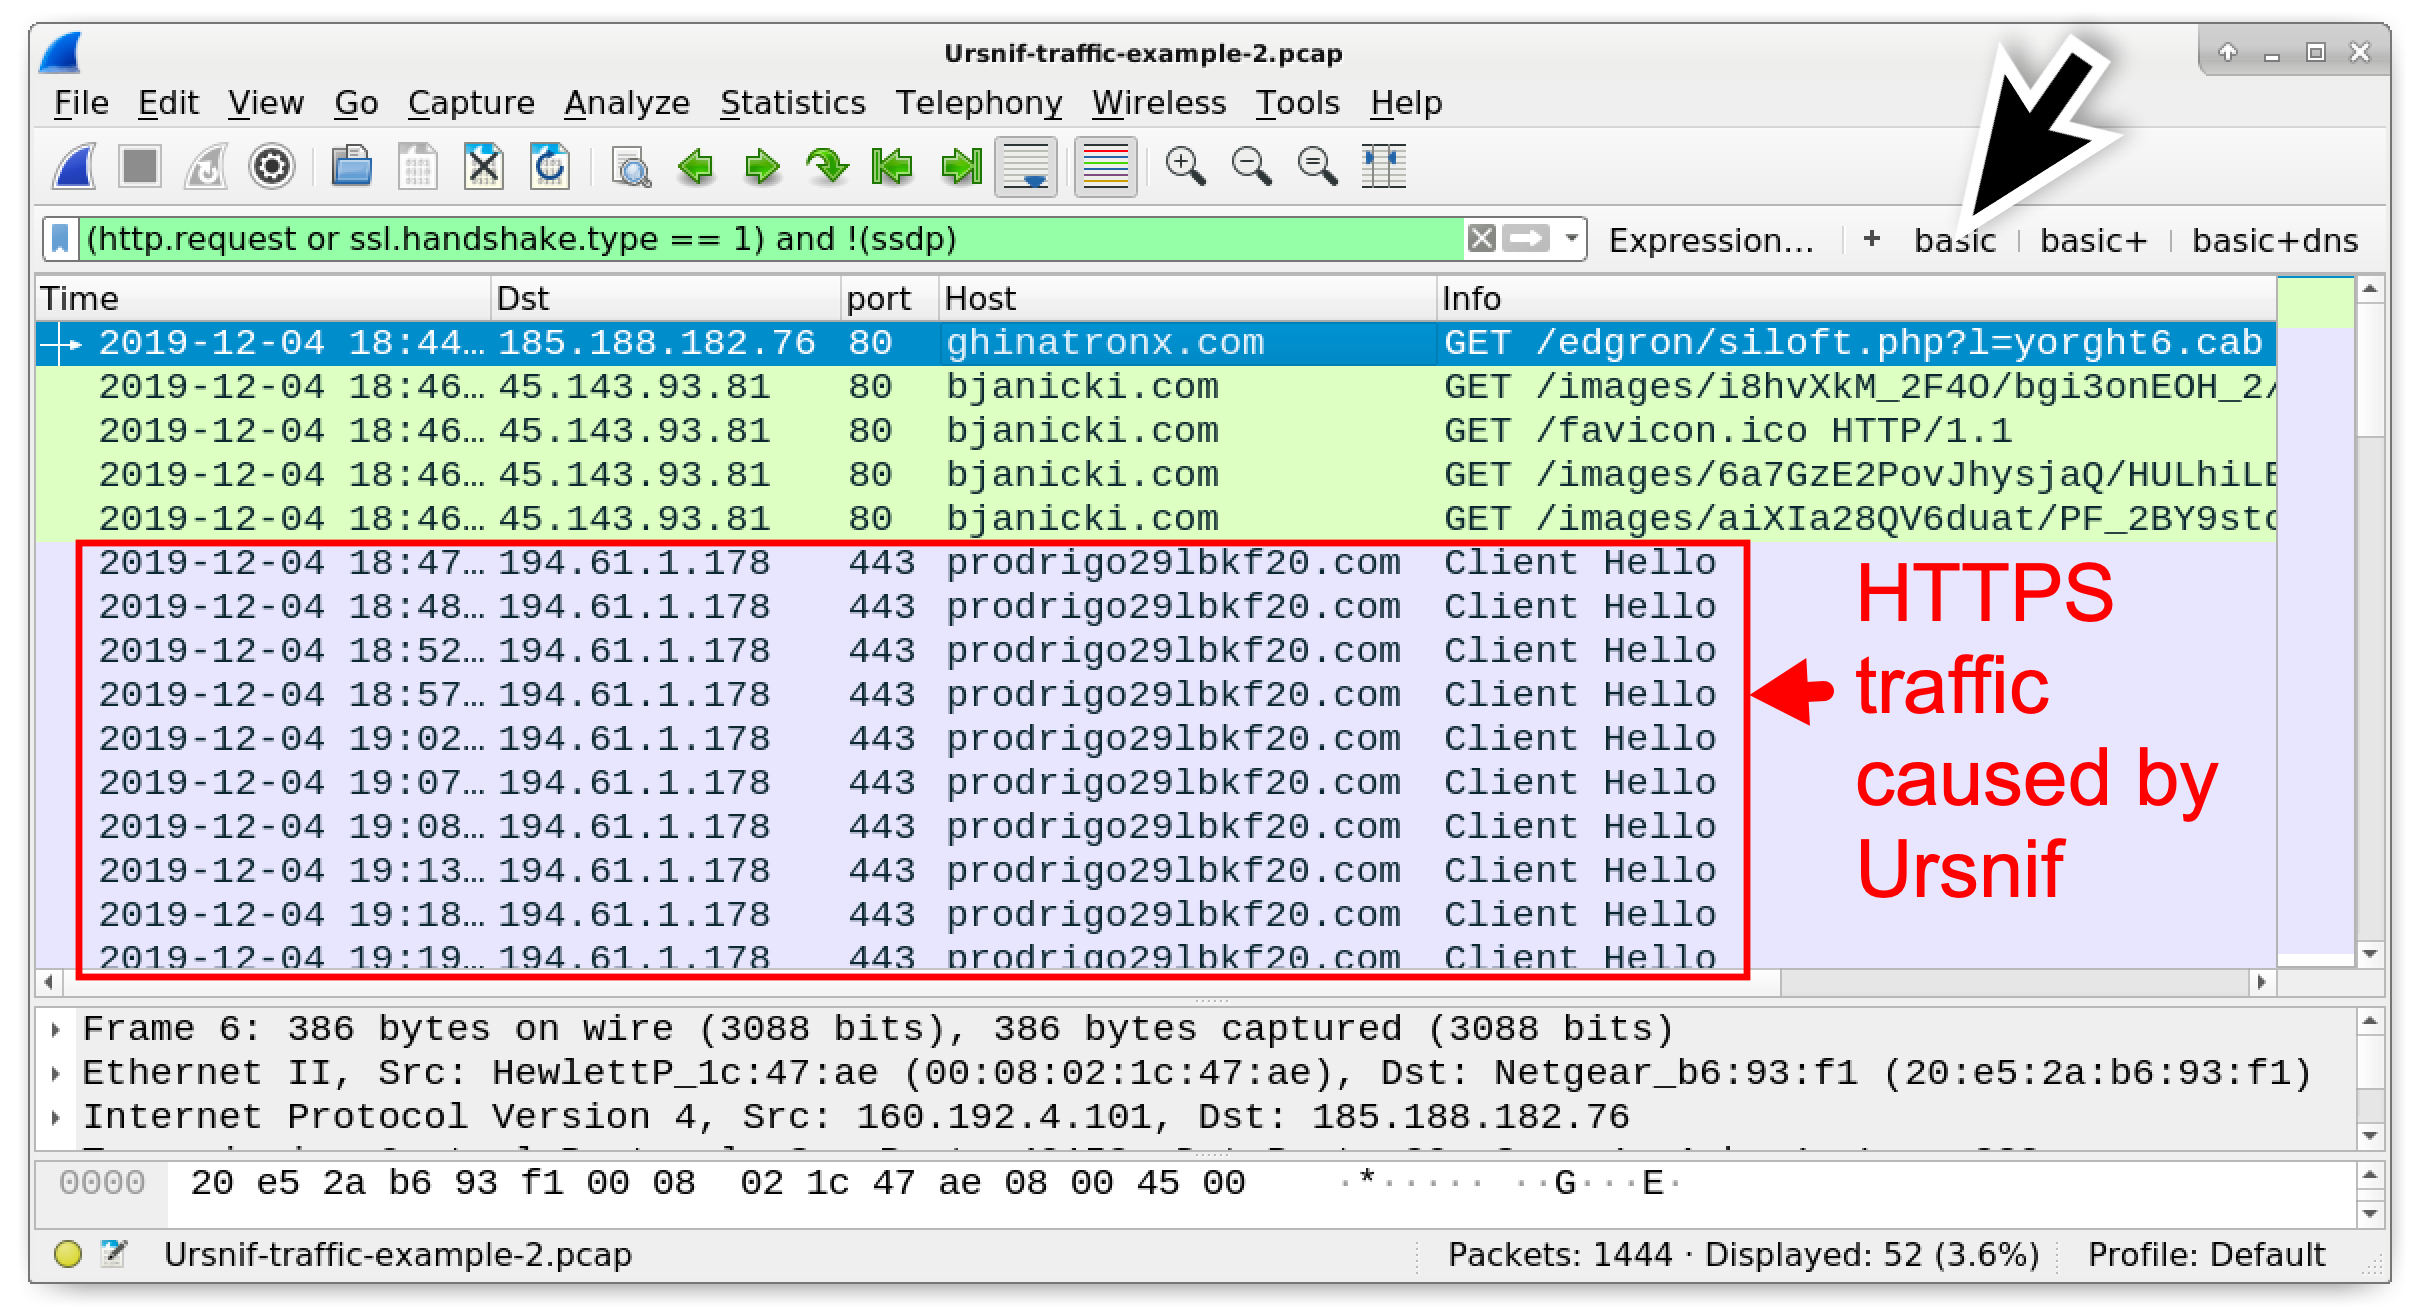 how to identify compromised computer wireshark pcap